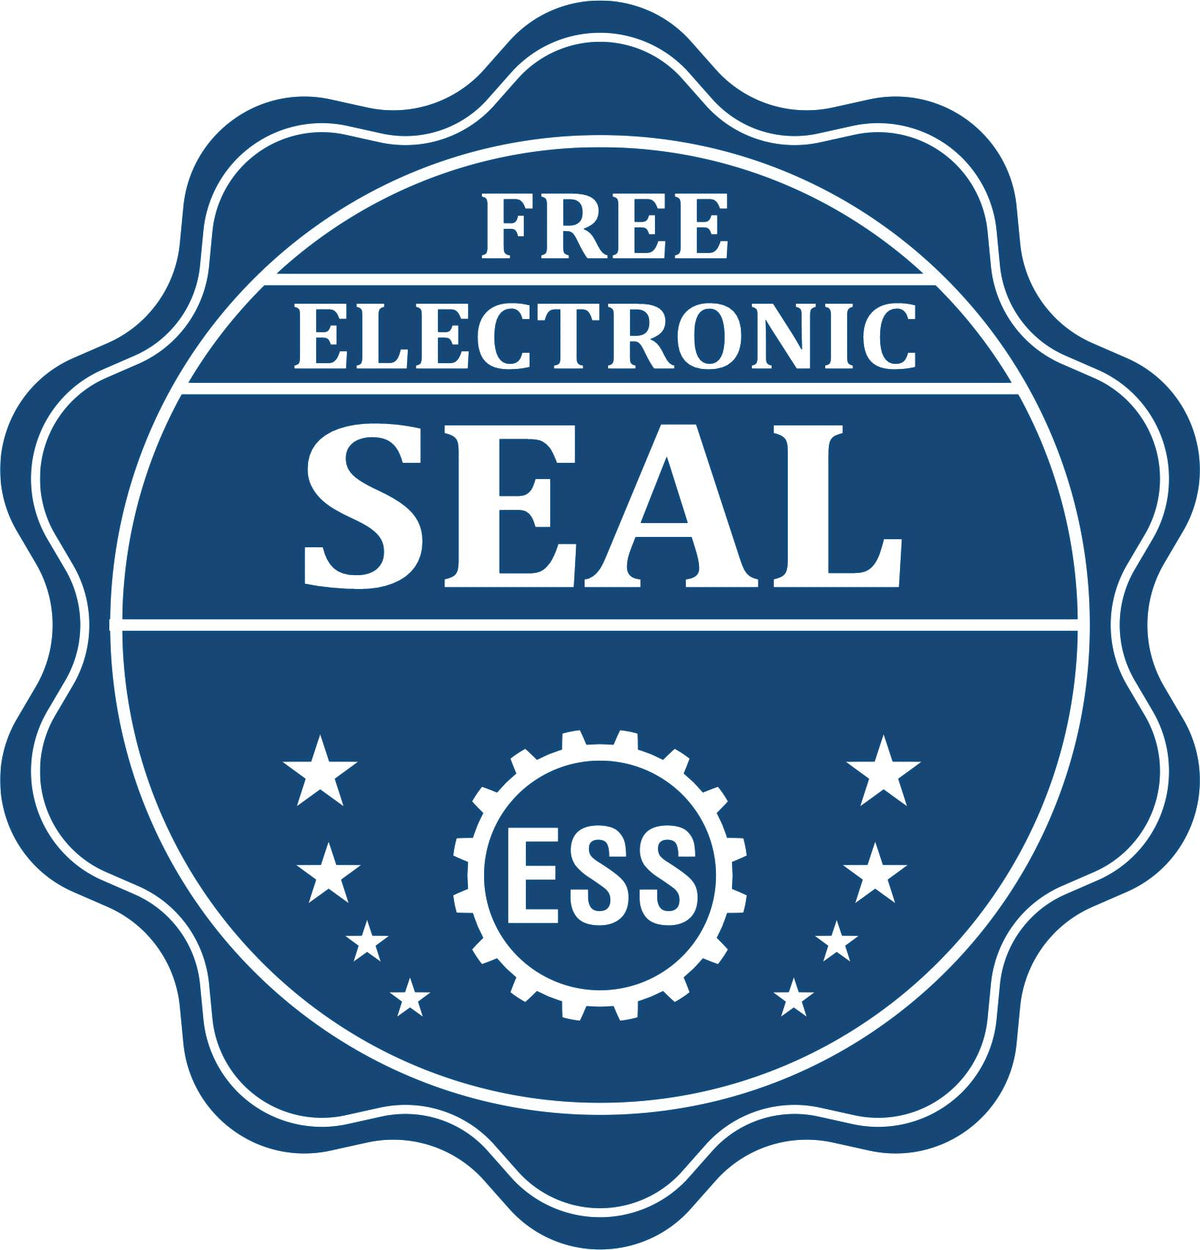 A badge showing a free electronic seal for the Gift Kansas Geologist Seal with stars and the ESS gear on the emblem.